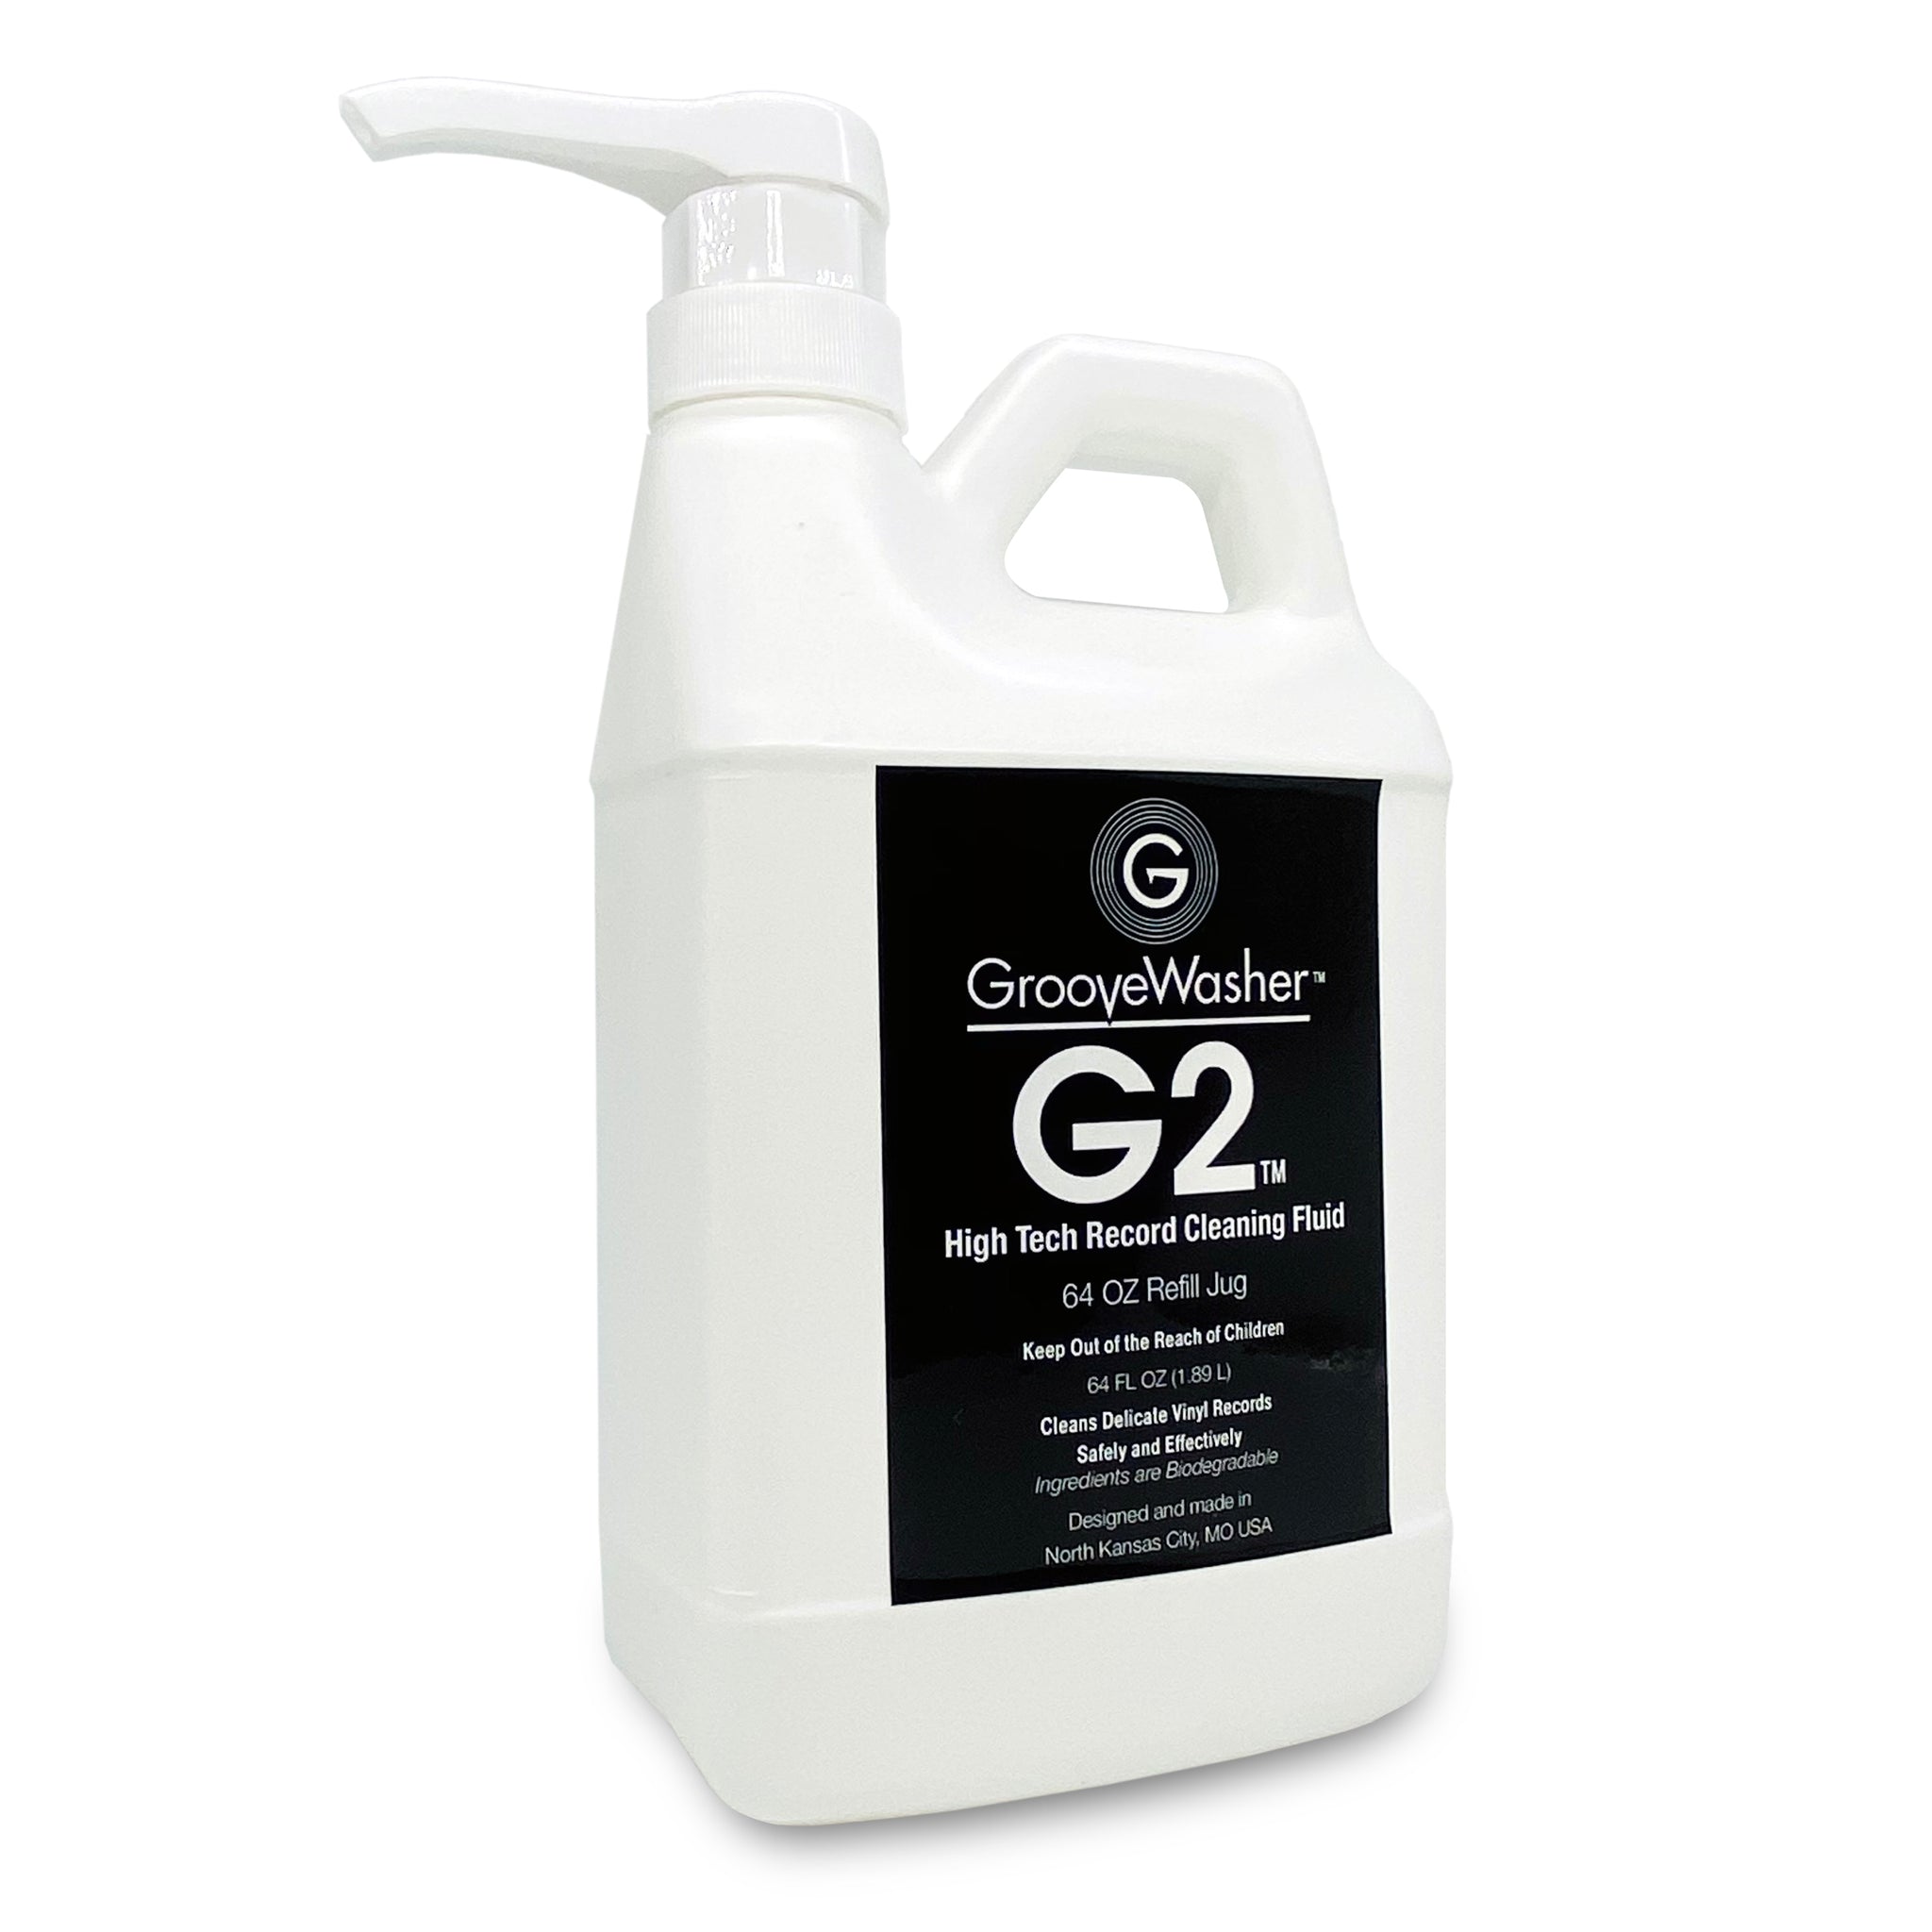 Extra Large 64 oz G2 Vinyl Record Cleaning Fluid